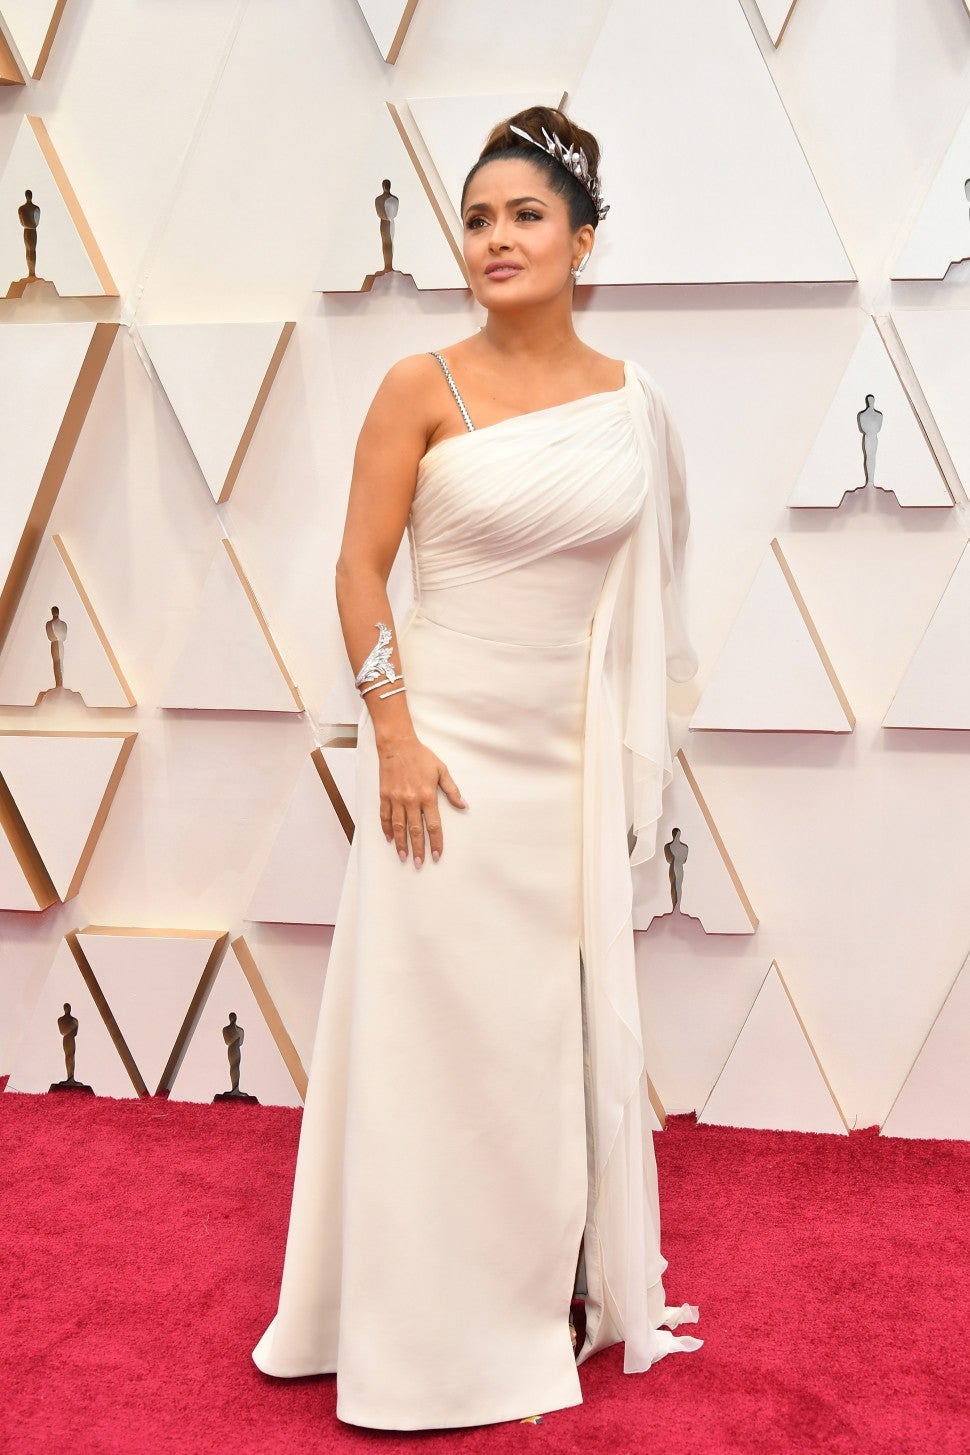 Salma Hayek Pinault attends the 92nd Annual Academy Awards at Hollywood and Highland on February 09, 2020 in Hollywood, California.